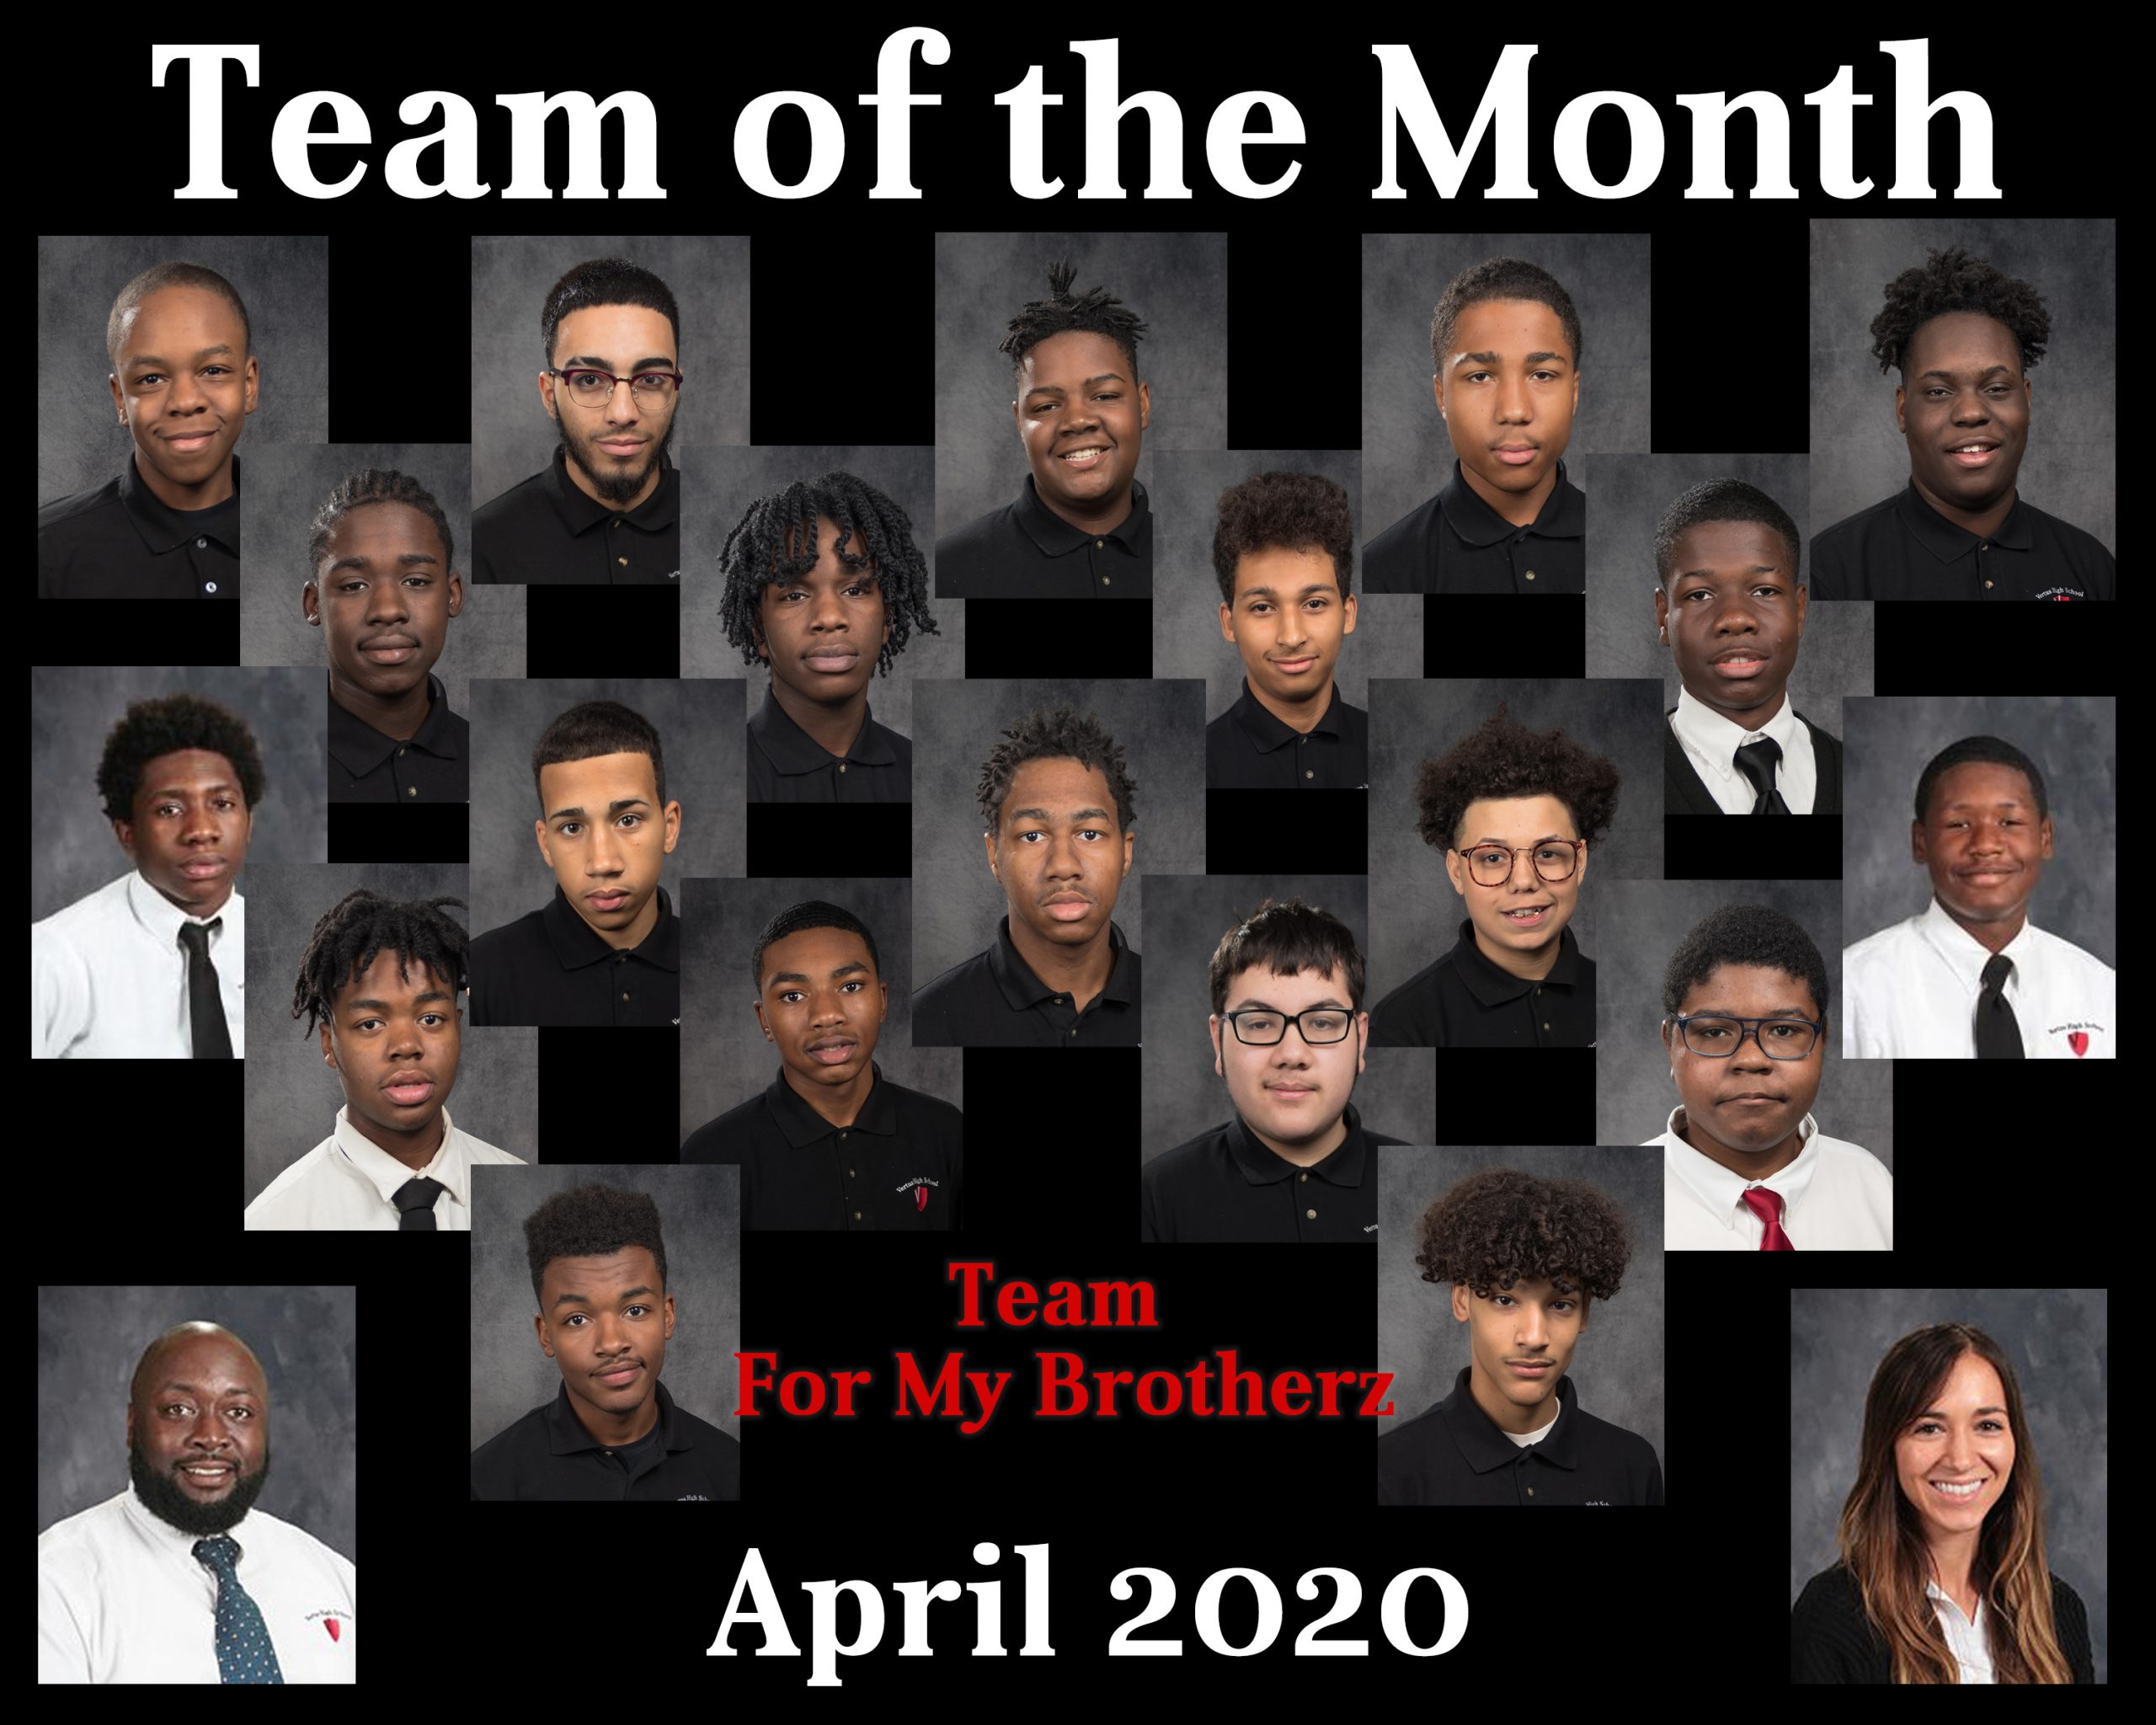 Team of the Month - April 2020